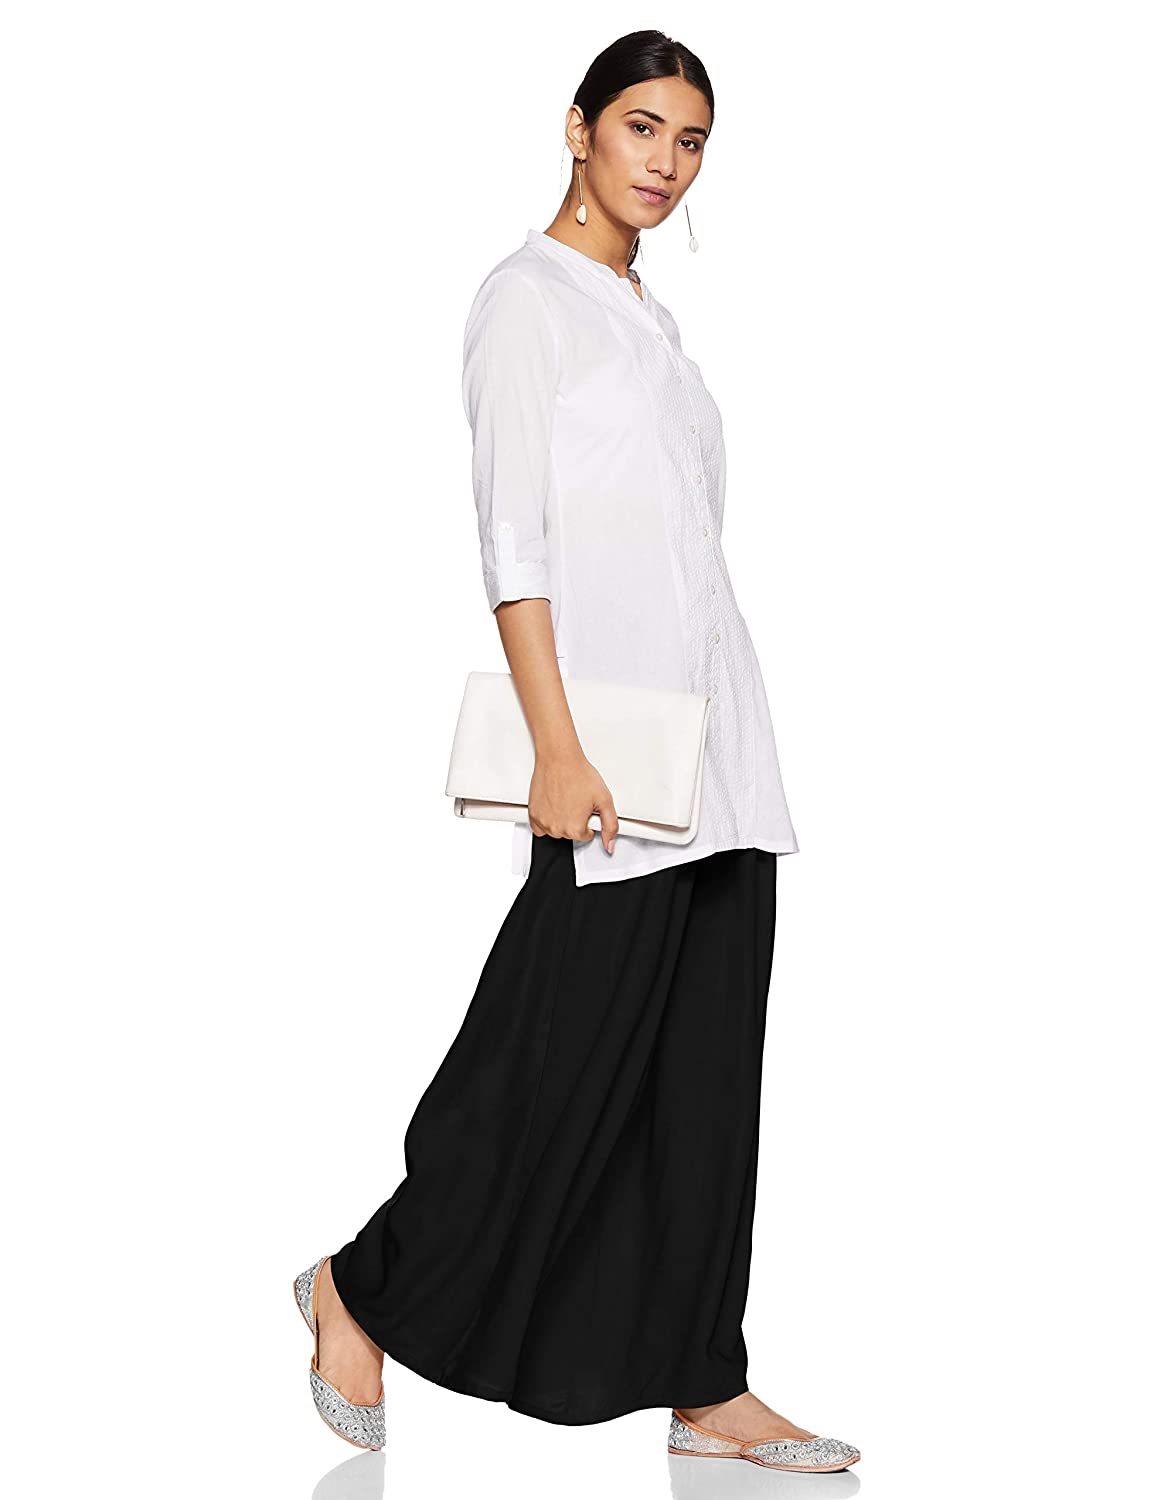 Out Of Touch Extreme Wide Leg Pants // Free People *2-10* | Women's  Clothing | Personify – Personify Shop